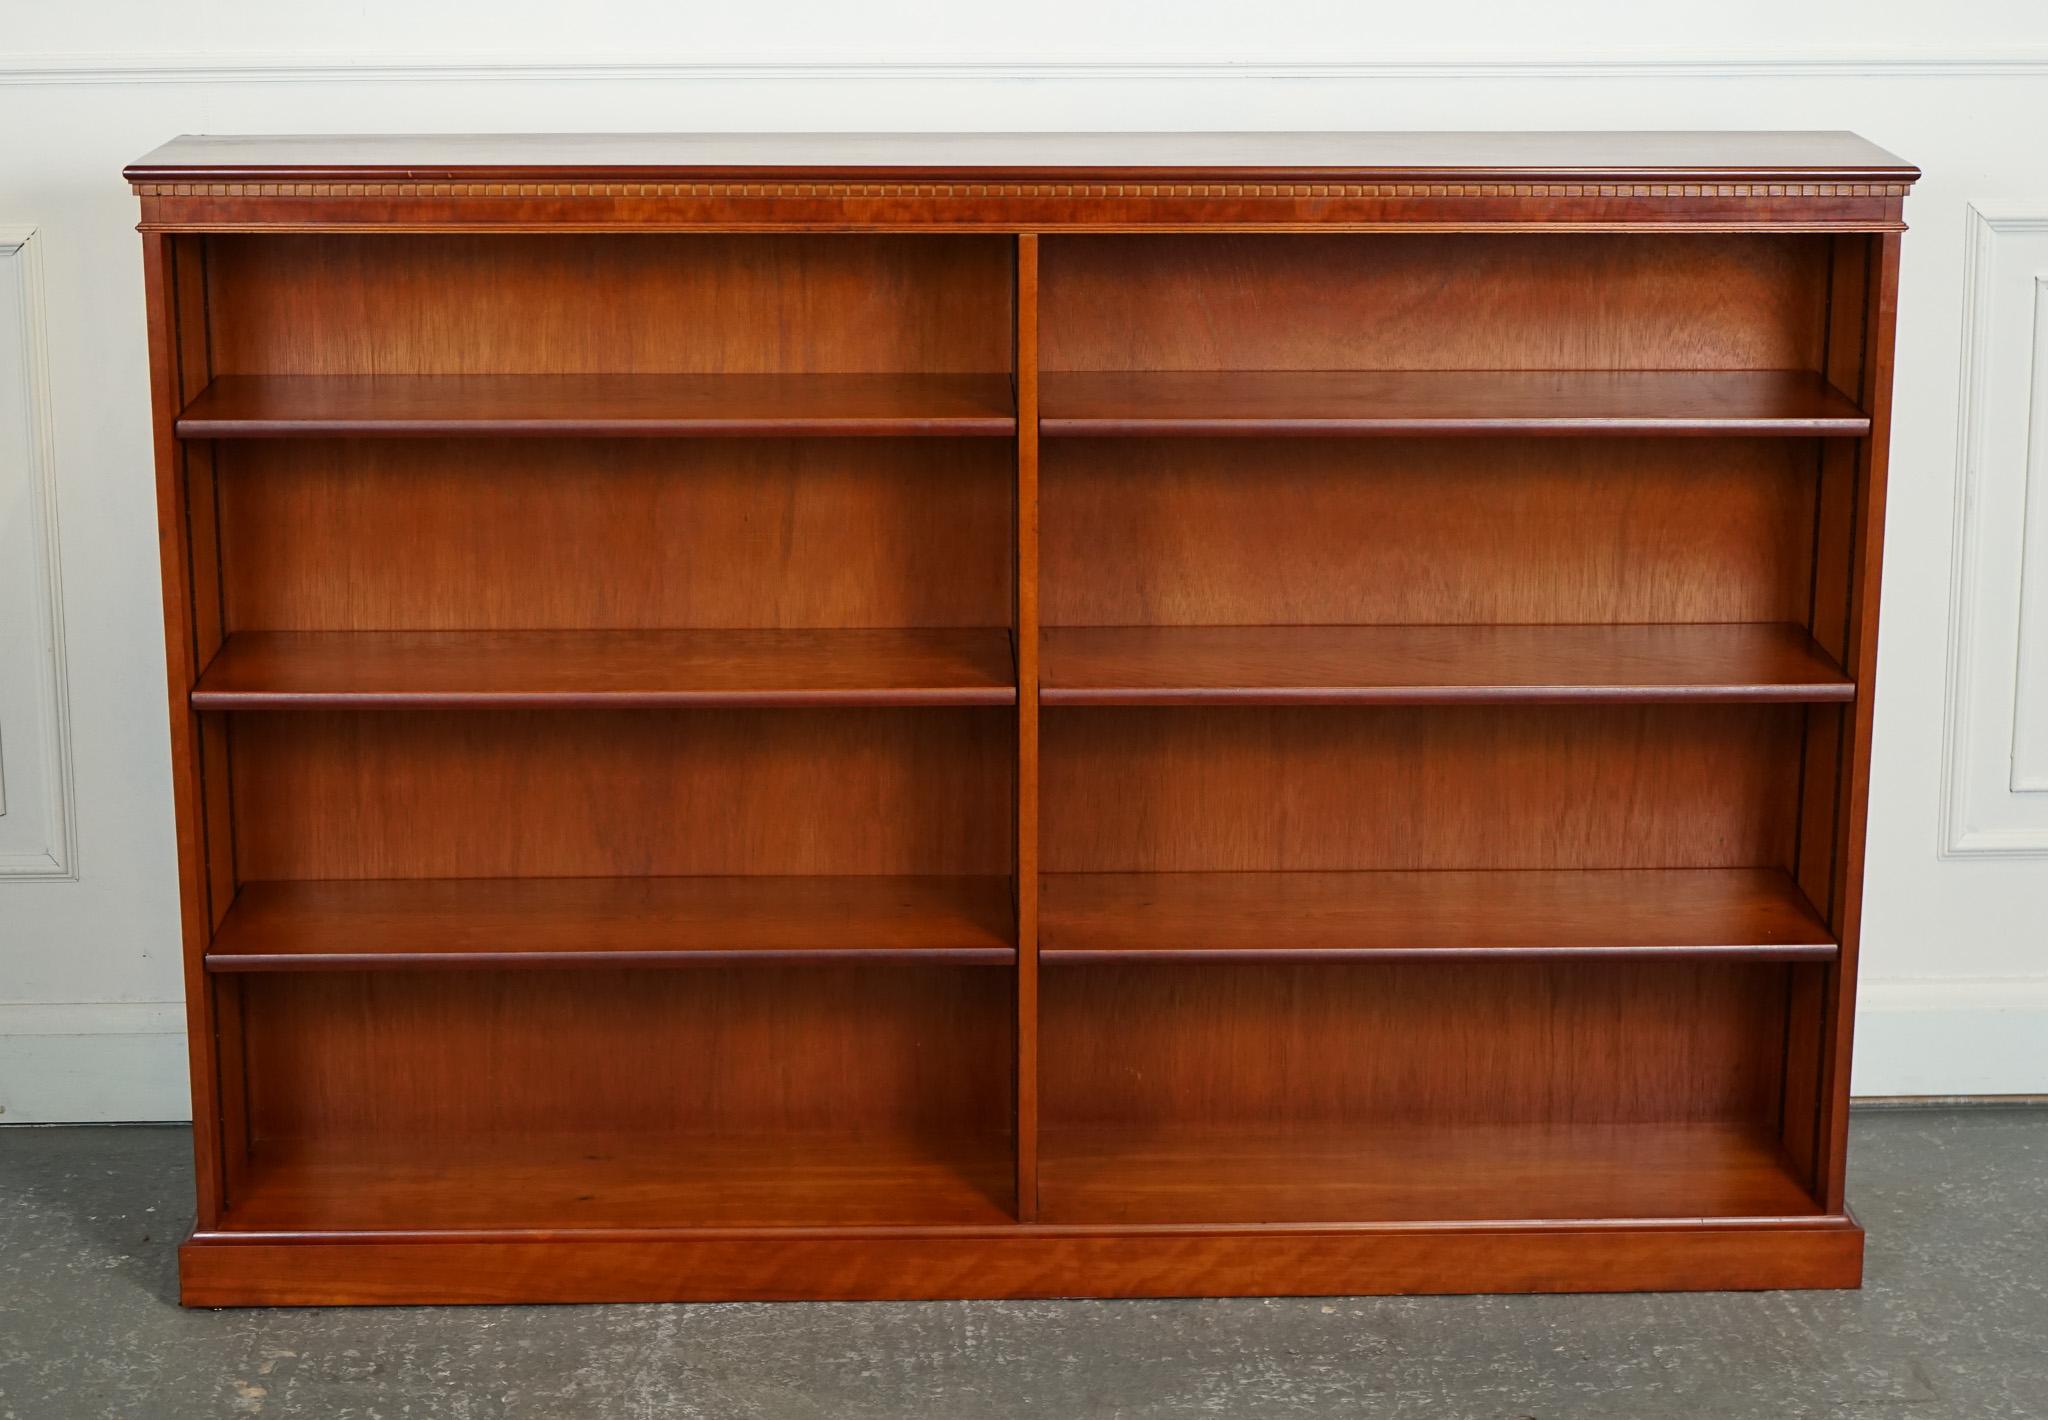 British VINTAGE YEW DOUBLE FRONTED LOW OPEN BOOKCASE WiTH ADJUSTABLE SHELVES For Sale